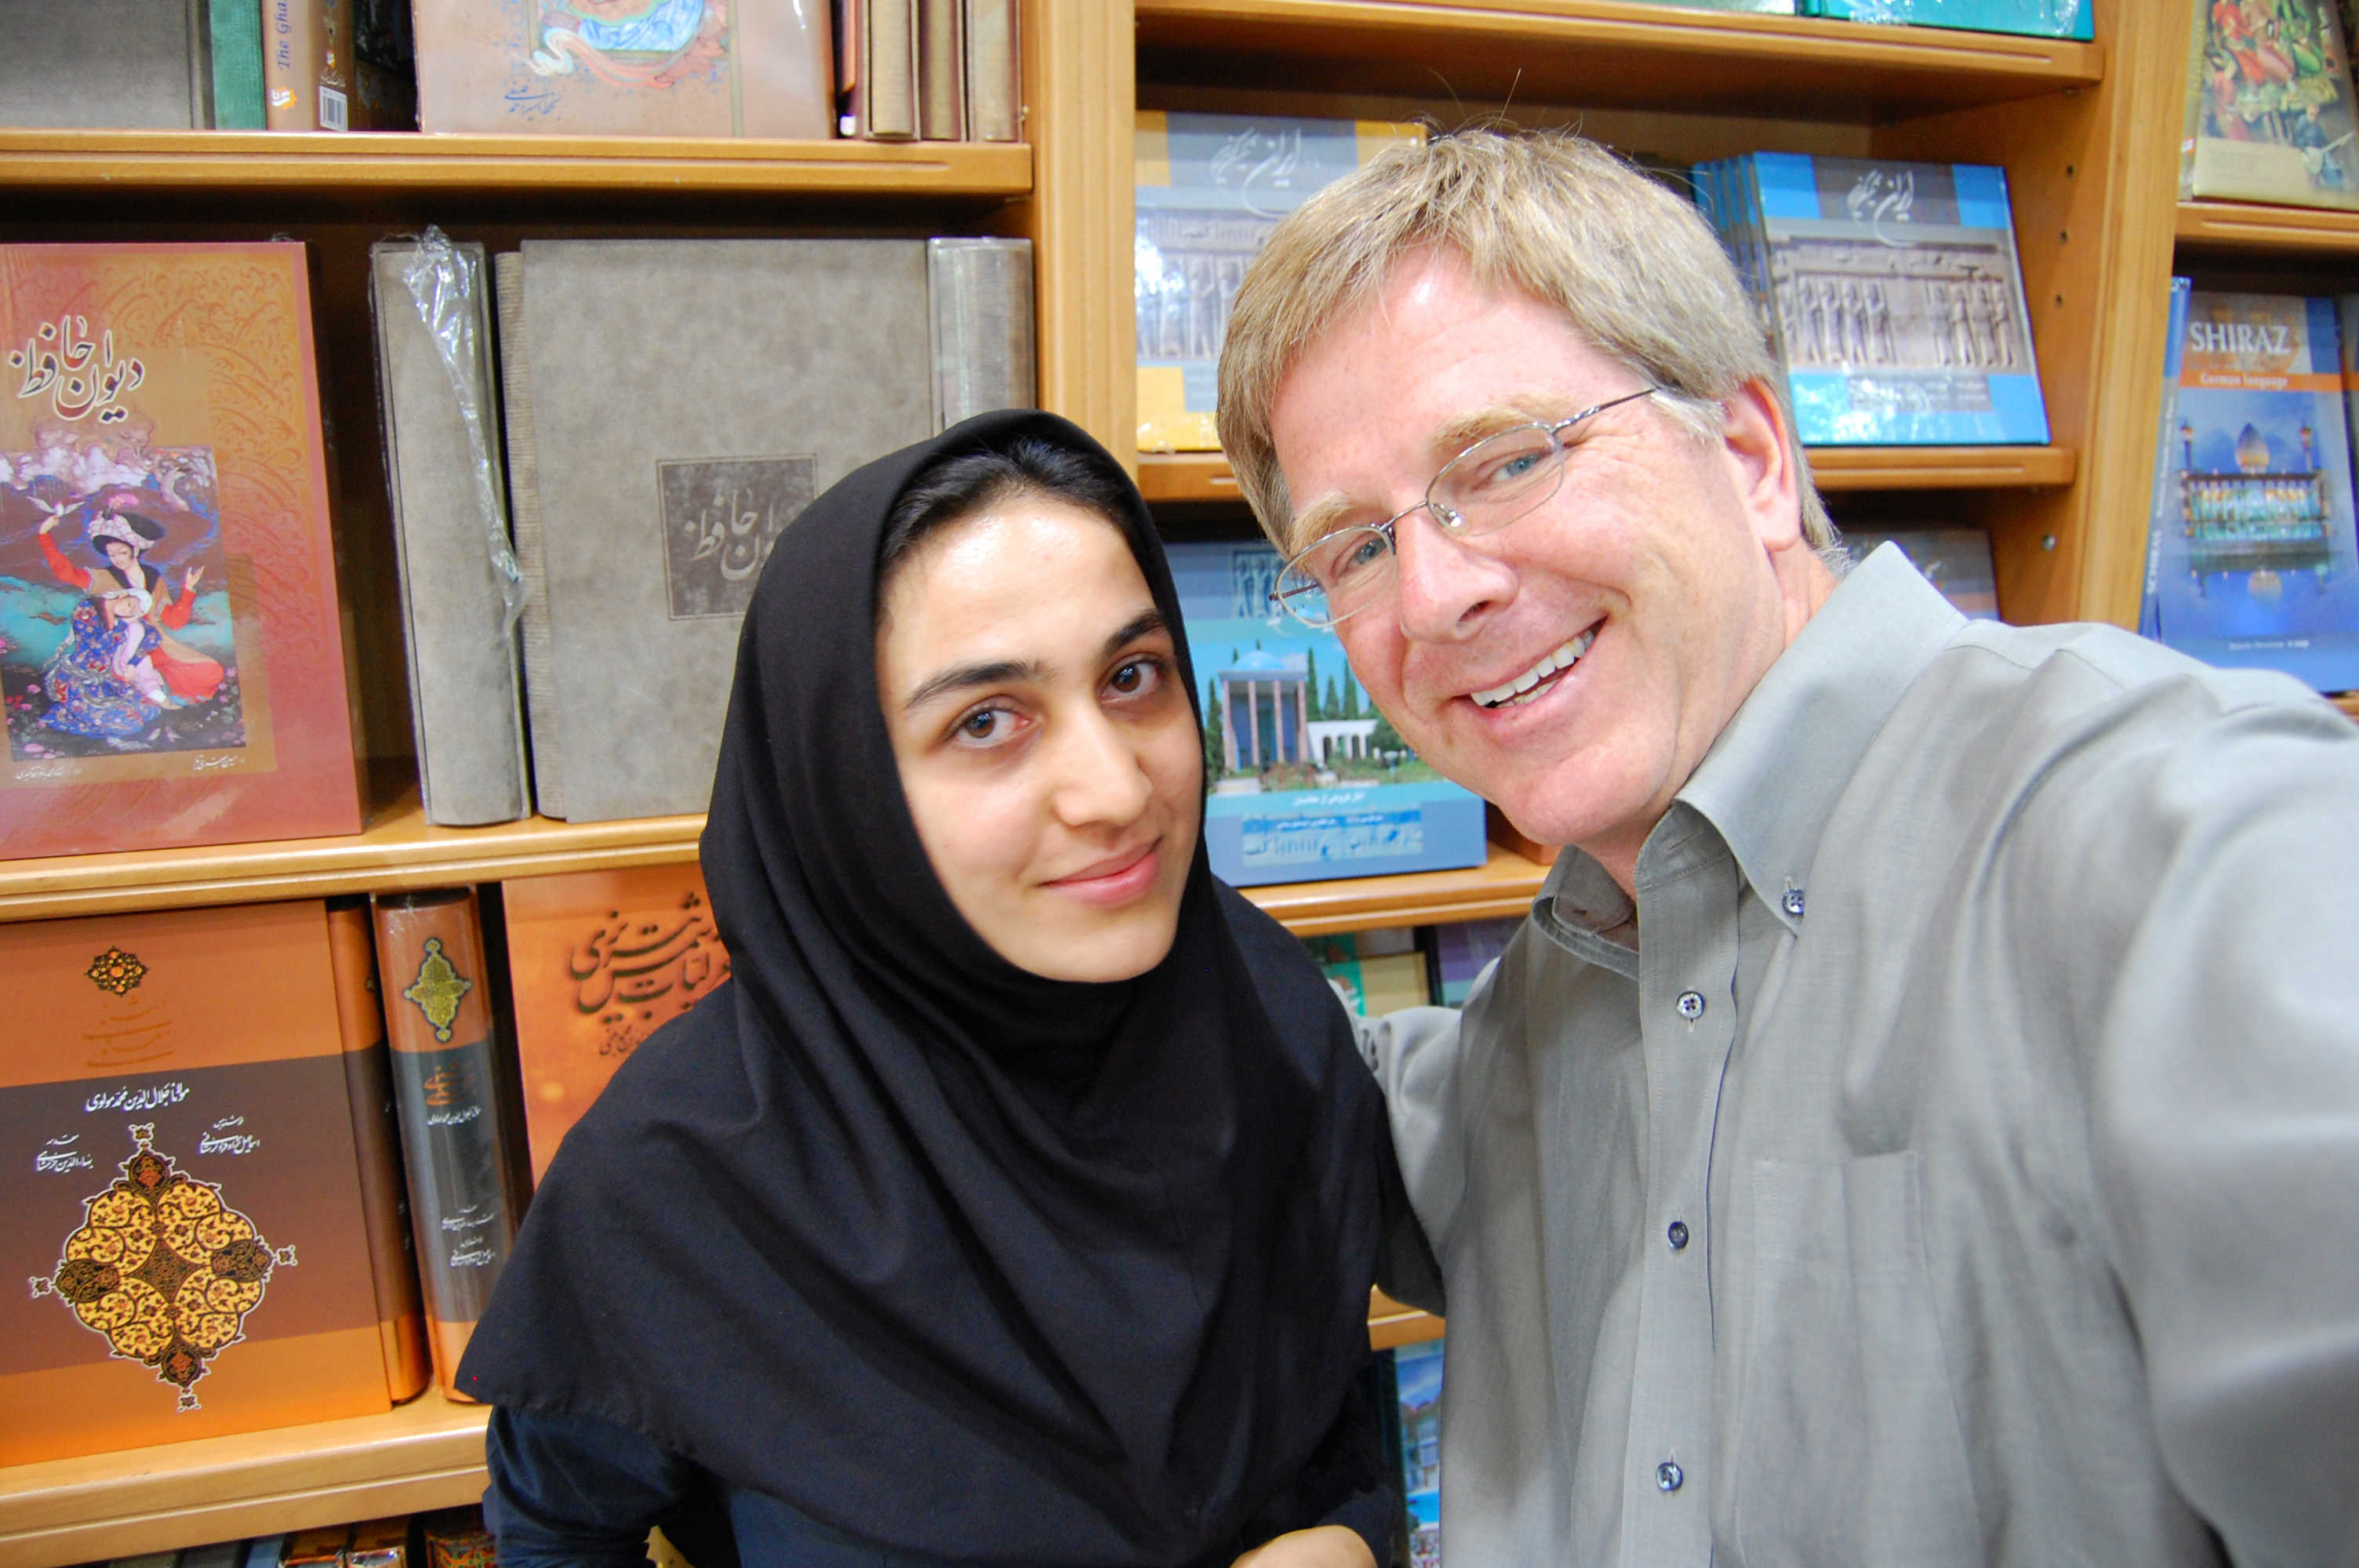 Rick Steves is introduced to fine poetry books in Iran